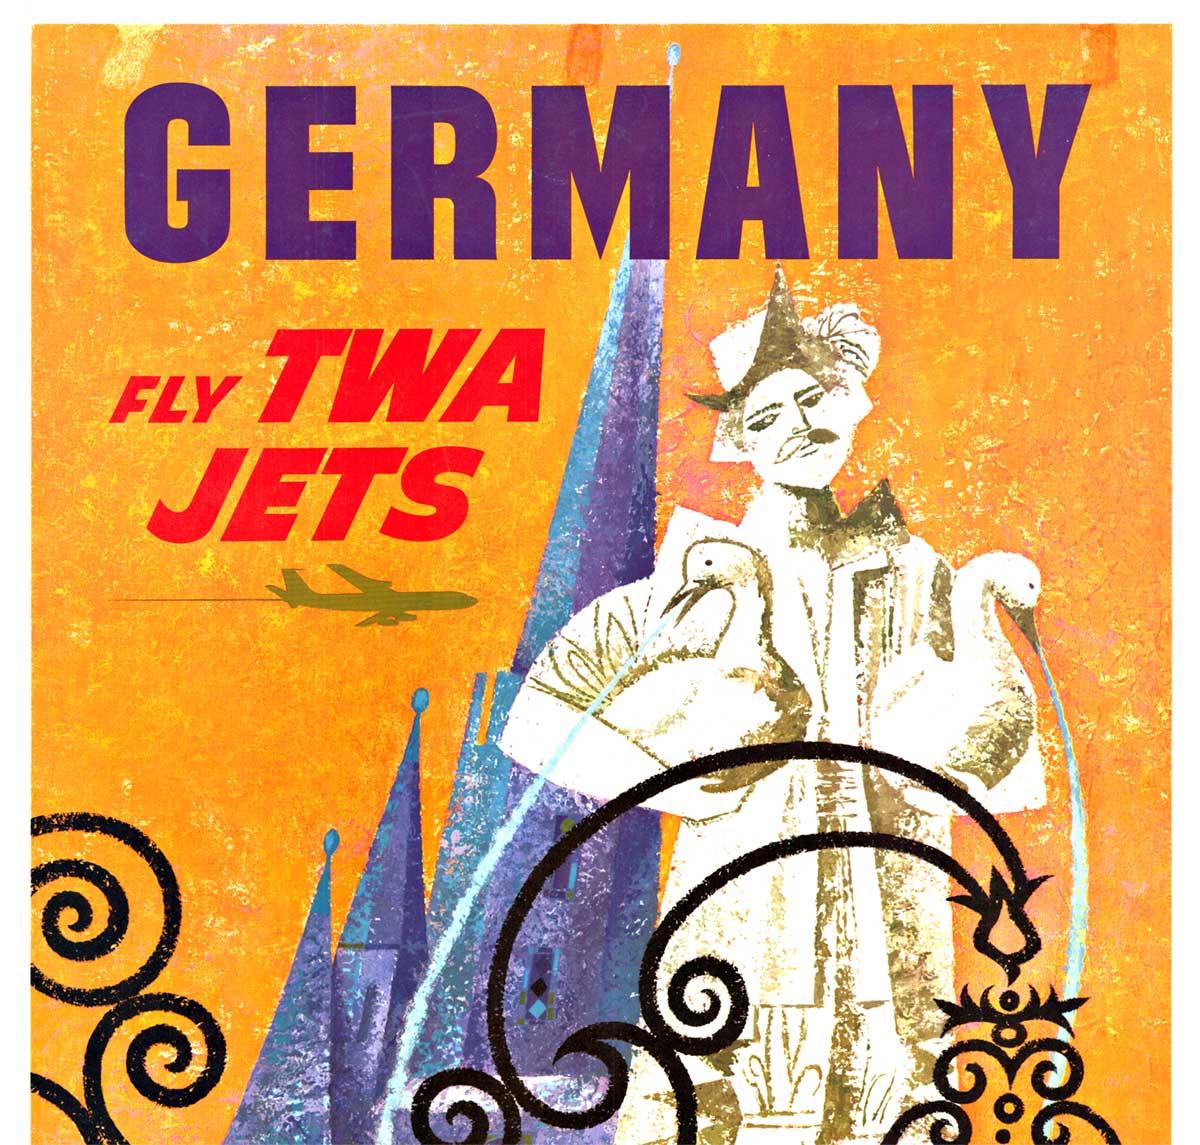 Original 'Germany Fly TWA Jets' vintage travel poster  Trans World Airlines - Print by David Klein